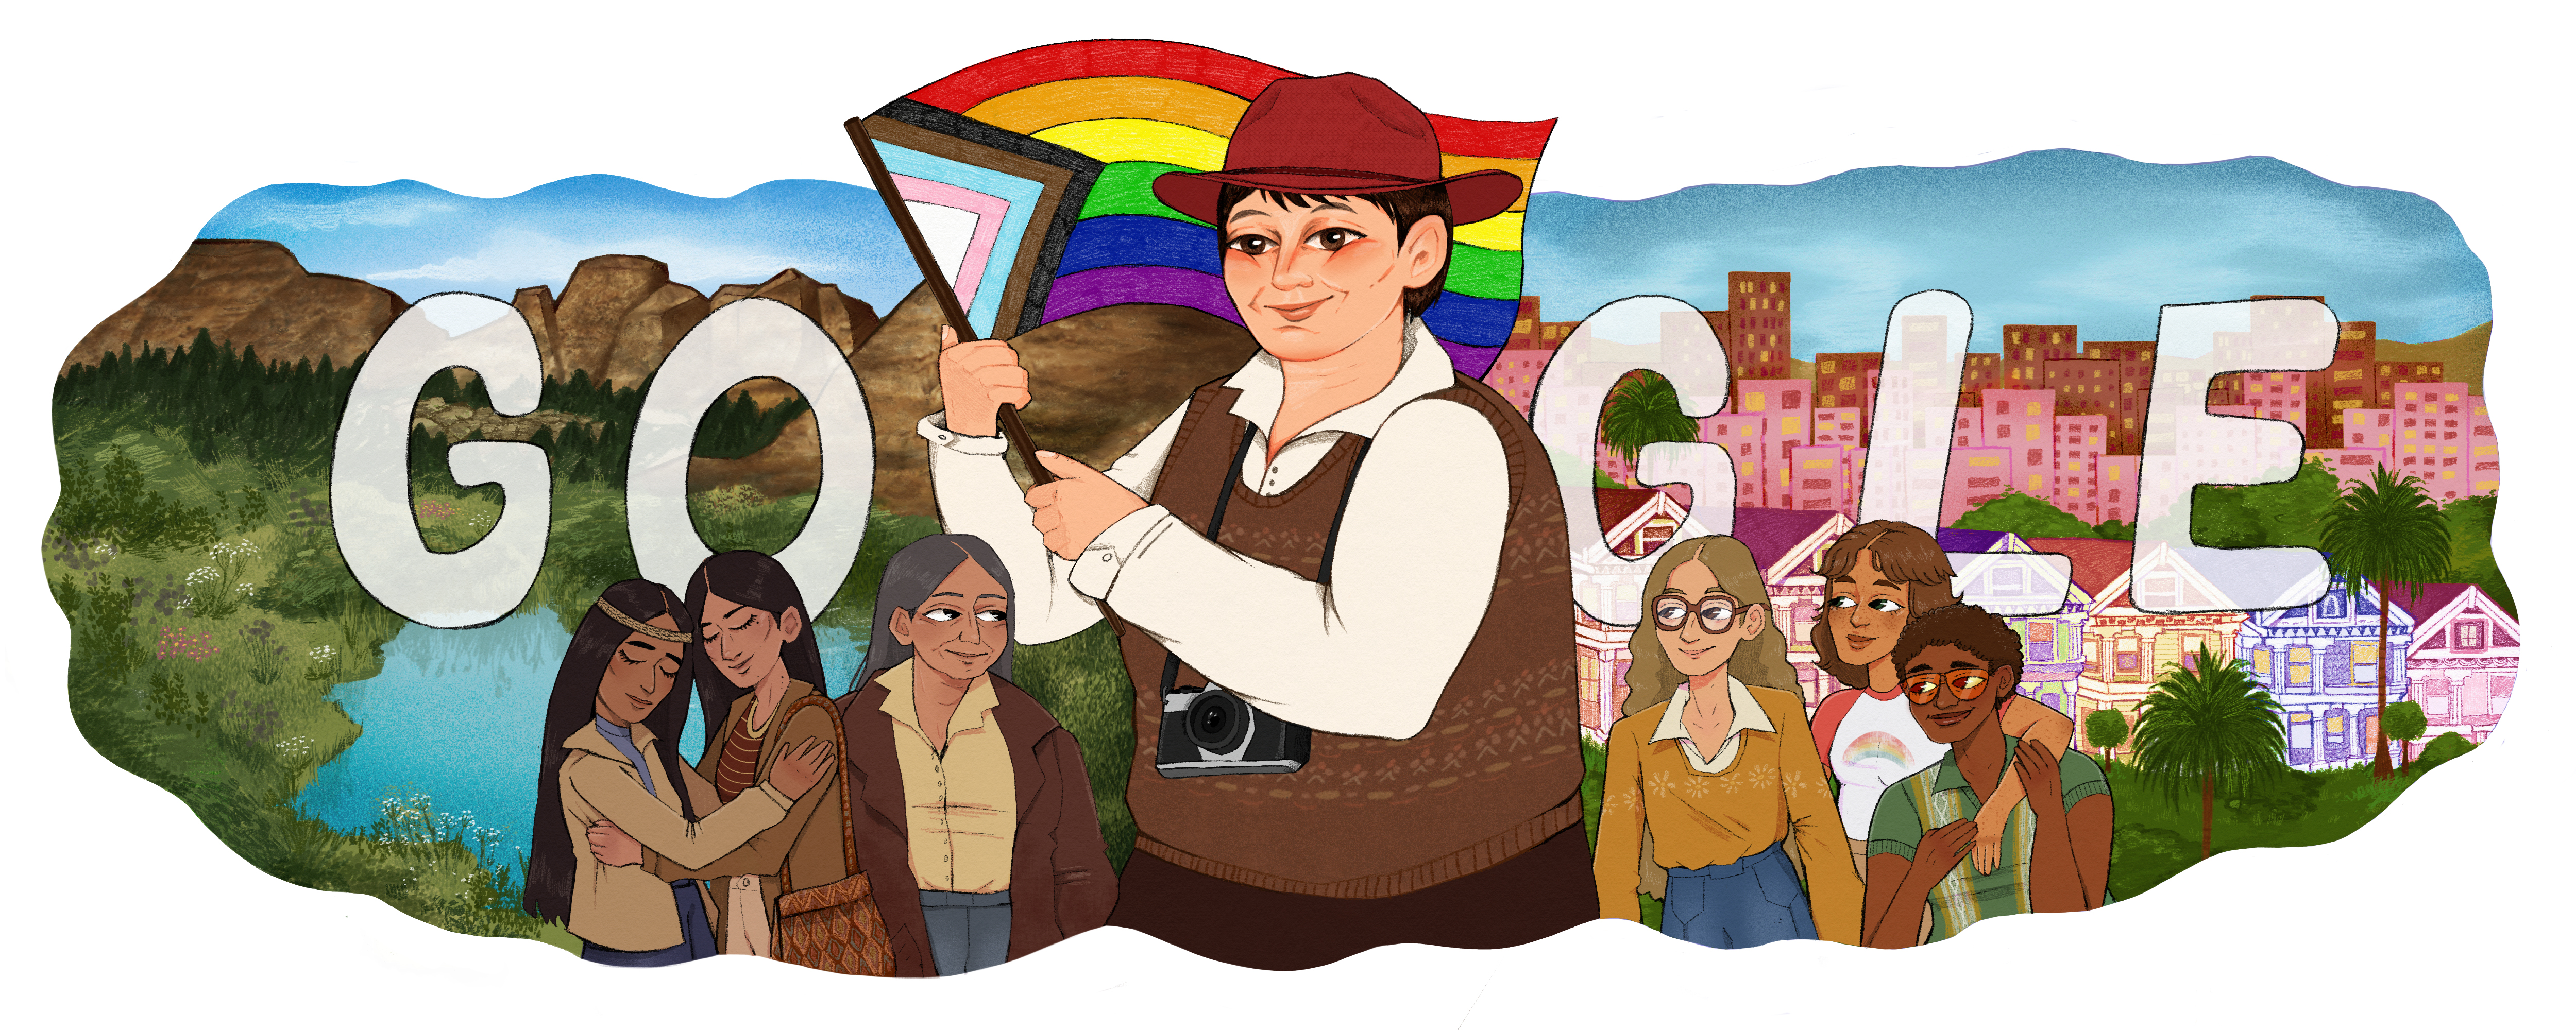 Illustration of Barbara May Cameron holding a rainbow Pride flag in front of the GOOGLE logo. Barbara has fair skin, short dark hair, and is wearing a red hat and brown vest. The backdrop consists of the San Francisco skyline with three diverse city dwellers on the right and a nature landscape with three Native American women on the left.